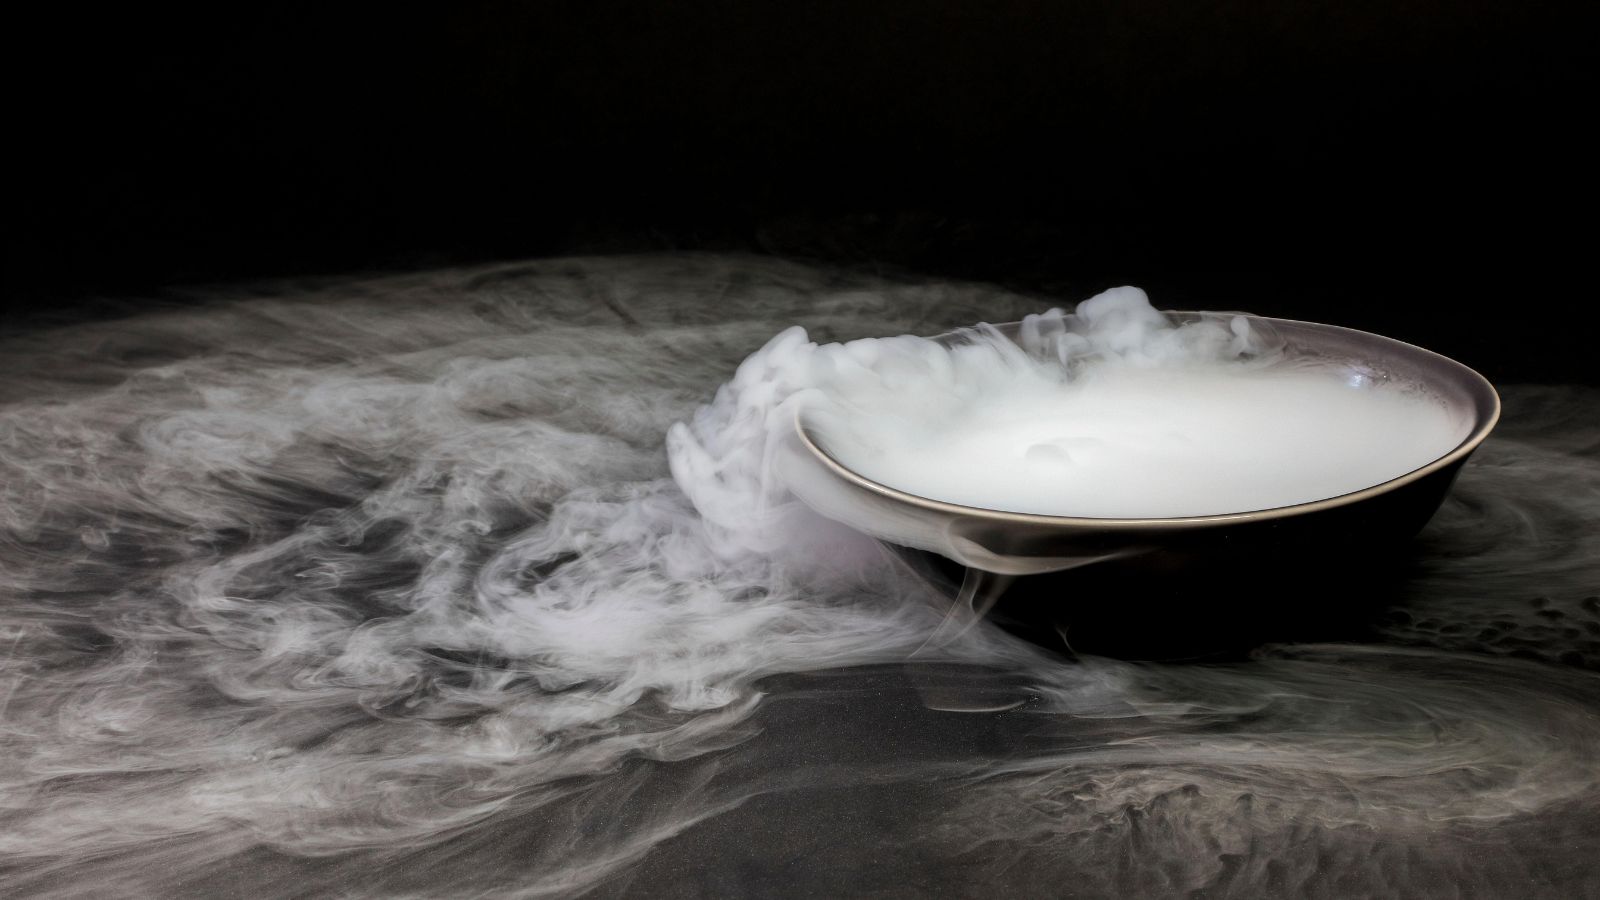 Cleaning with dry ice: how it works, plus pros and cons